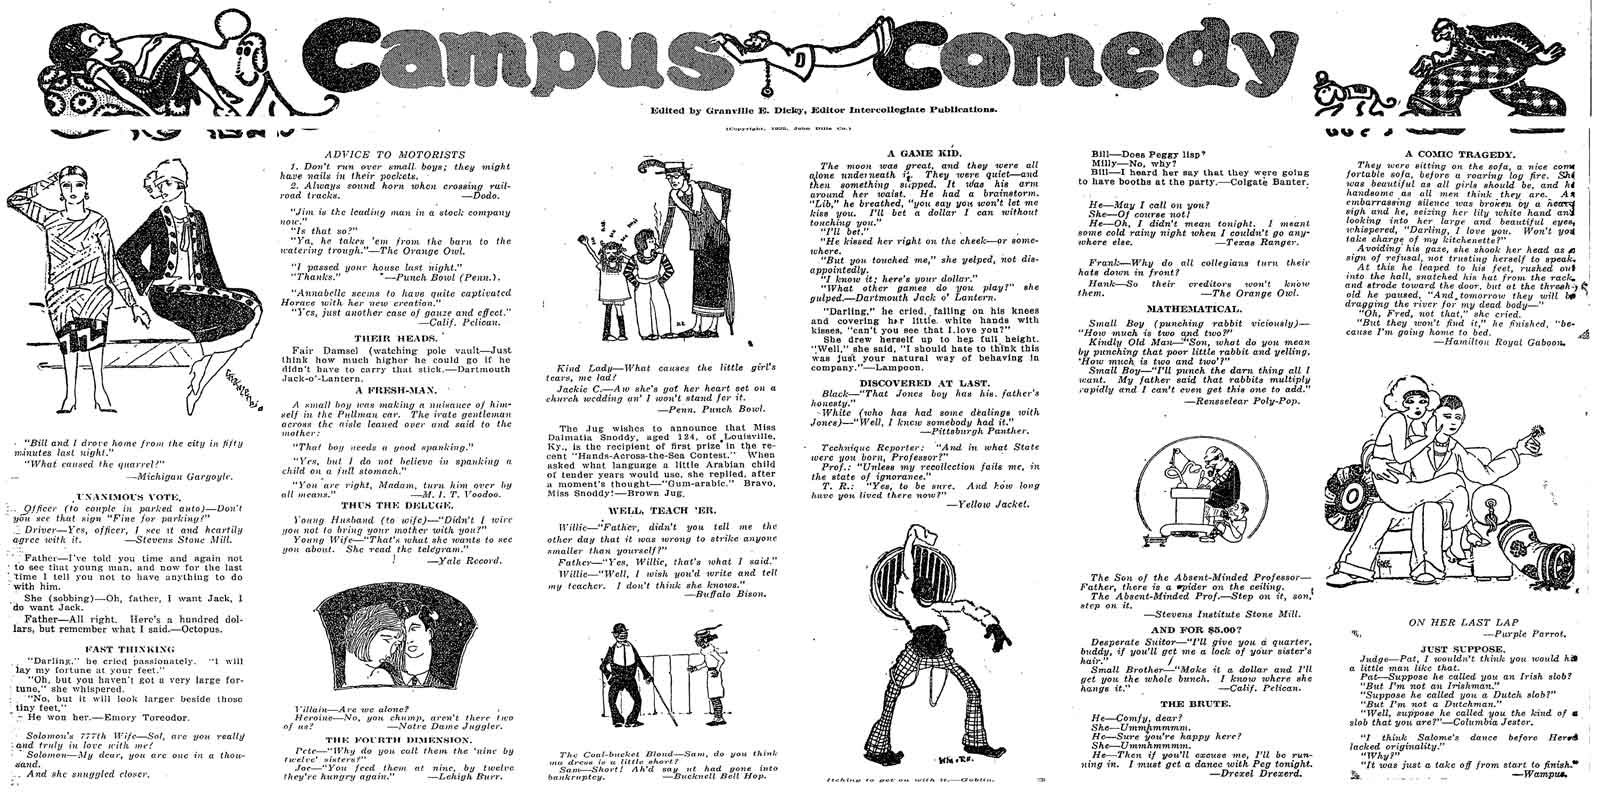 image campuscomedy250920-jpg